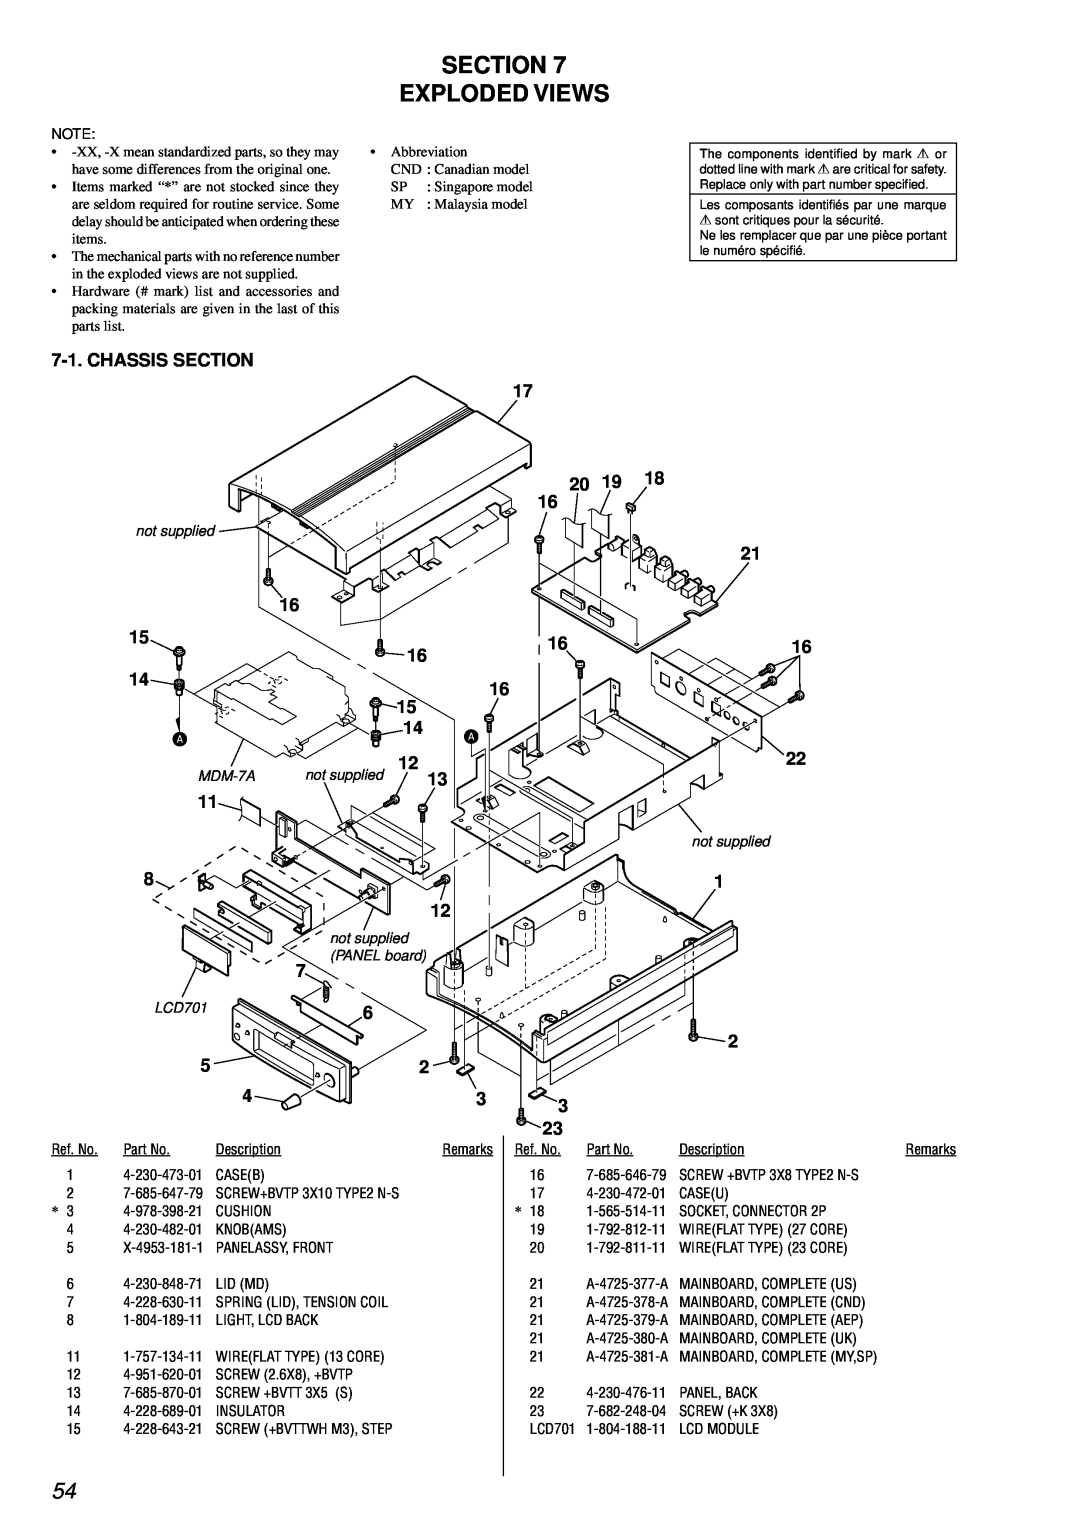 Sony MDS-PC3 specifications Section Exploded Views, Chassis, 11 8, 16 16, 15 14 A, 7 6 2 3, 20 19 16 21, 1 2 3 23 